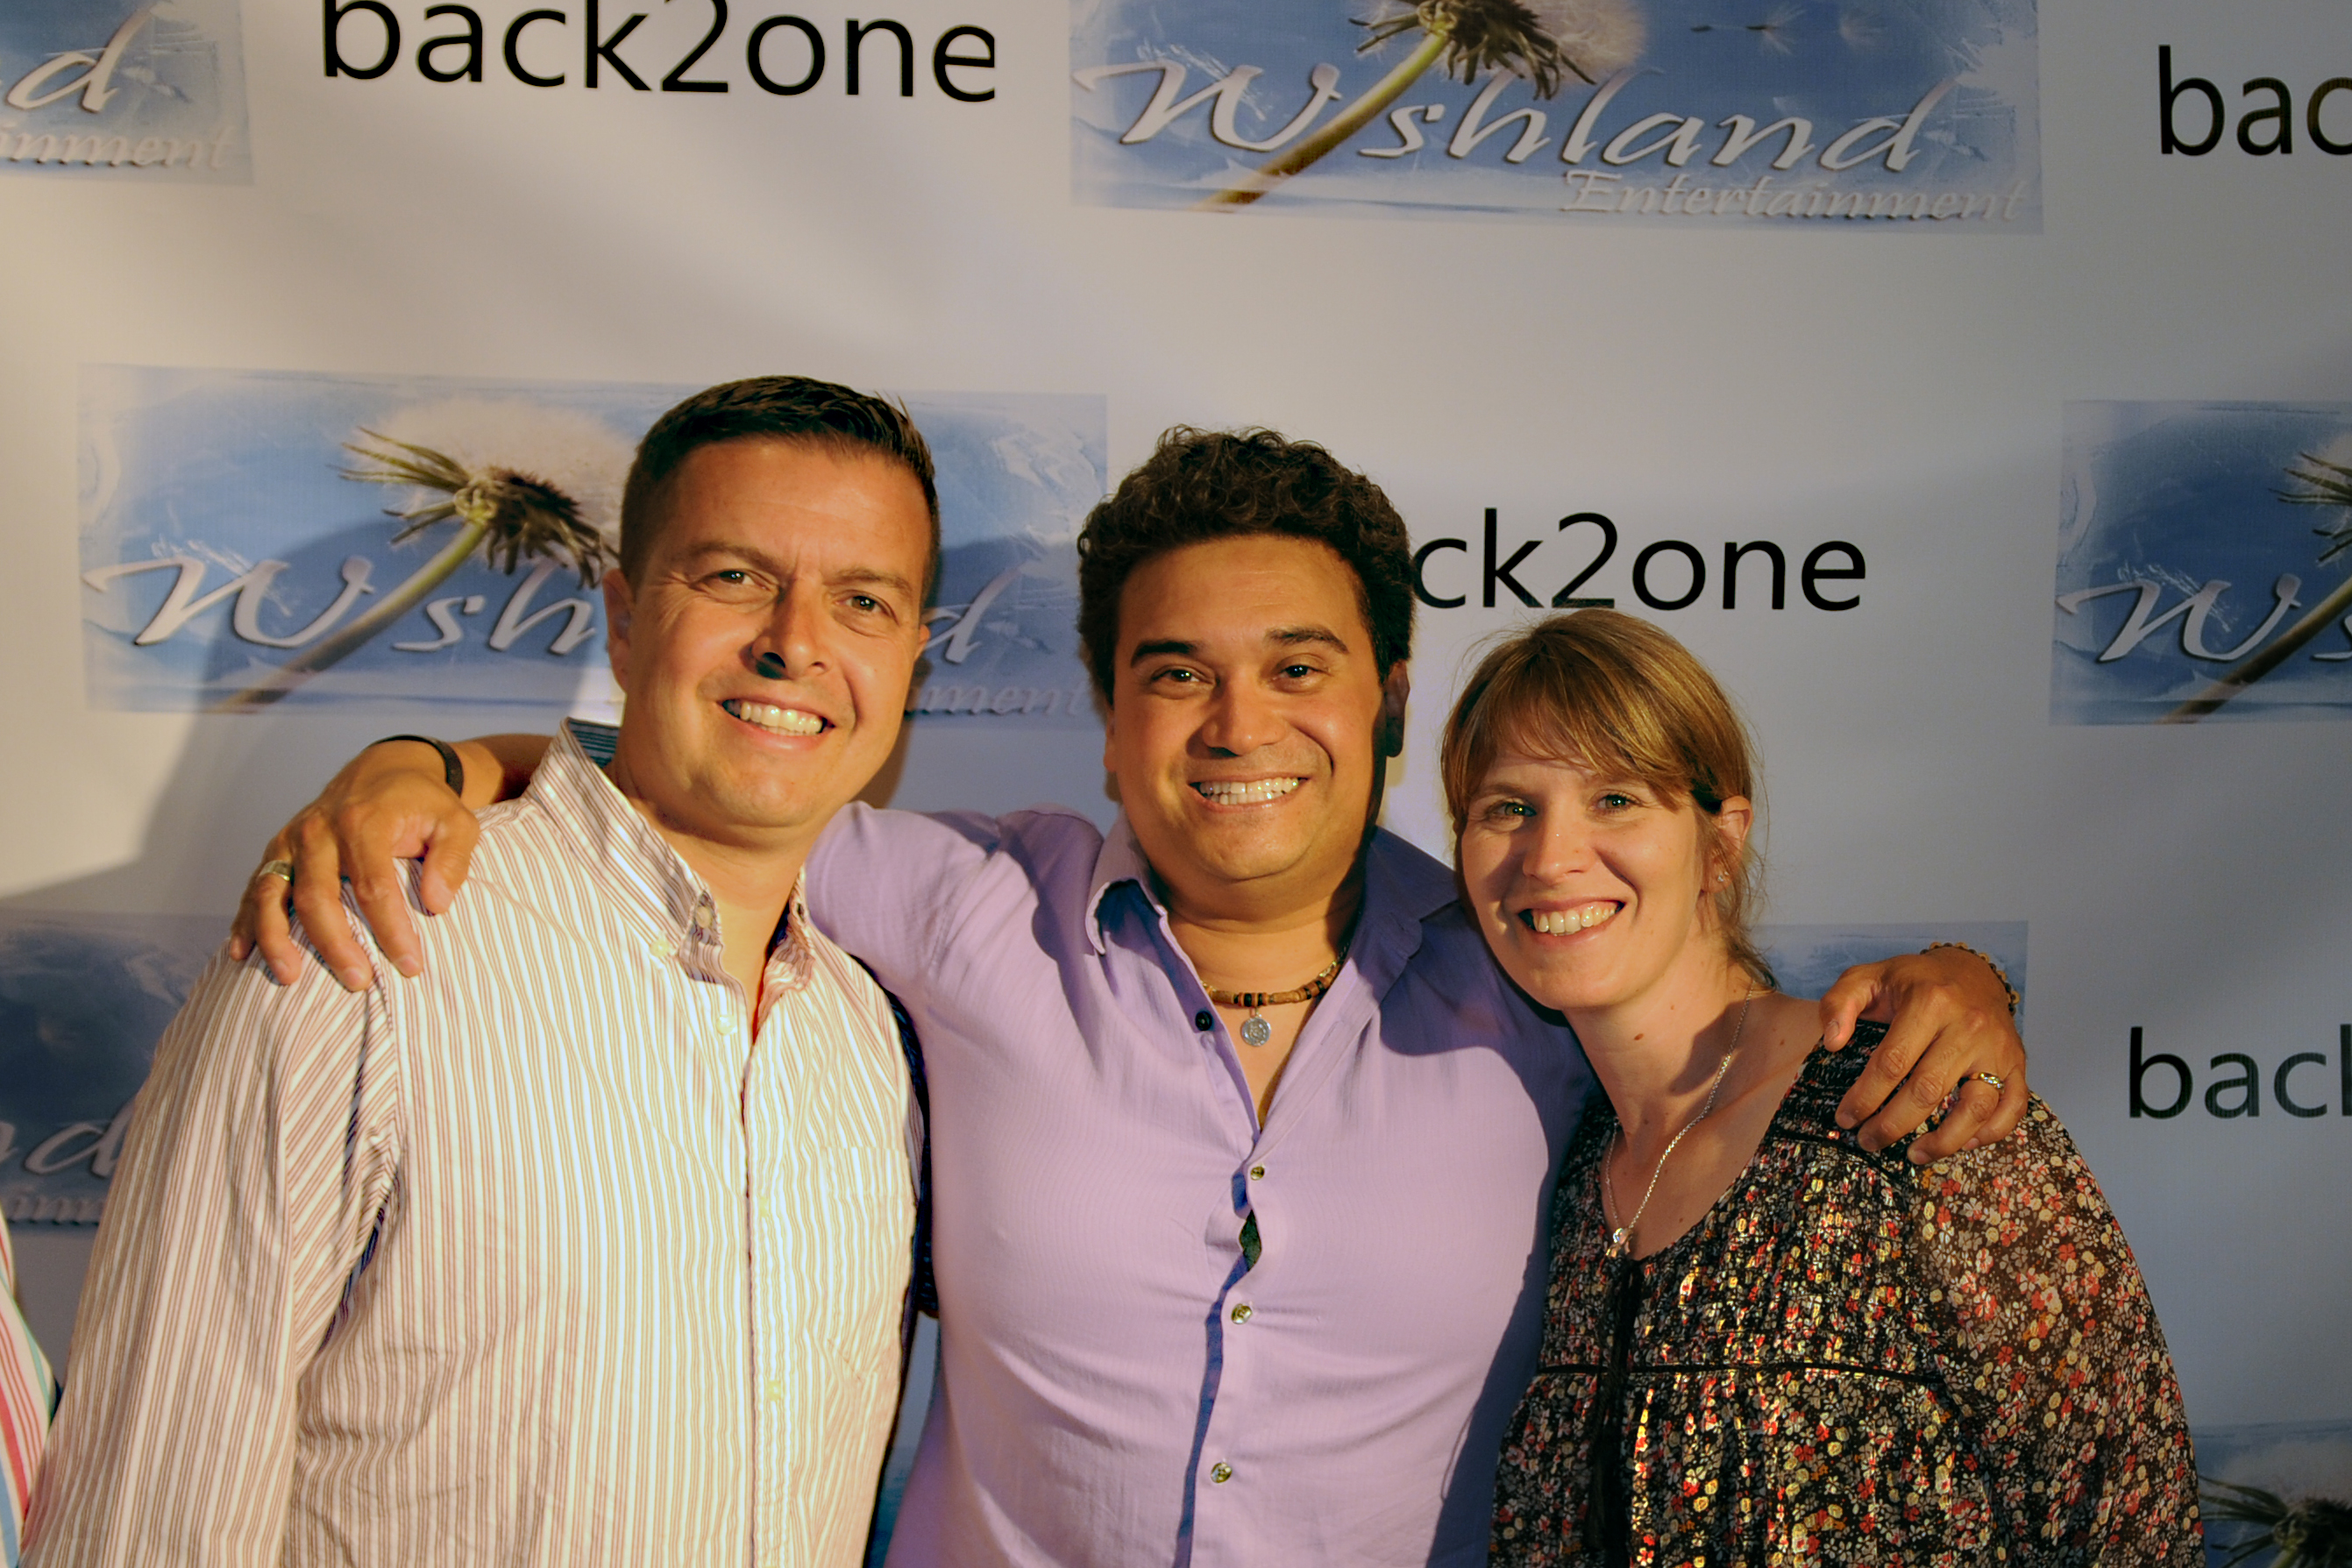 Nelson, Kevin Lasit and Shelly at the premiere of back2one.